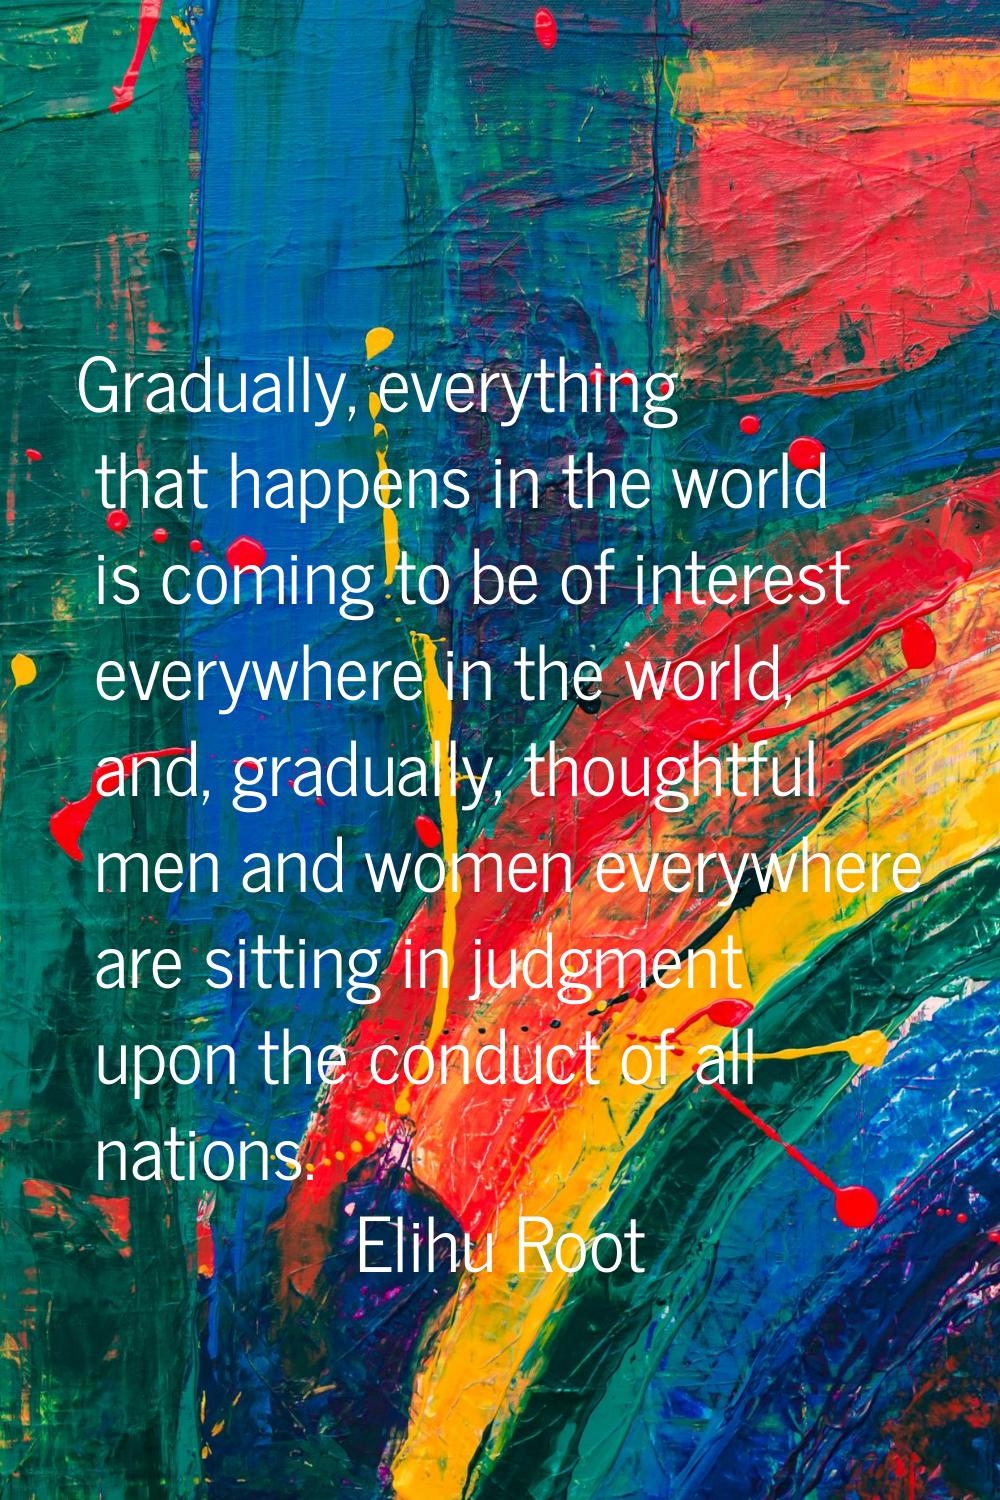 Gradually, everything that happens in the world is coming to be of interest everywhere in the world